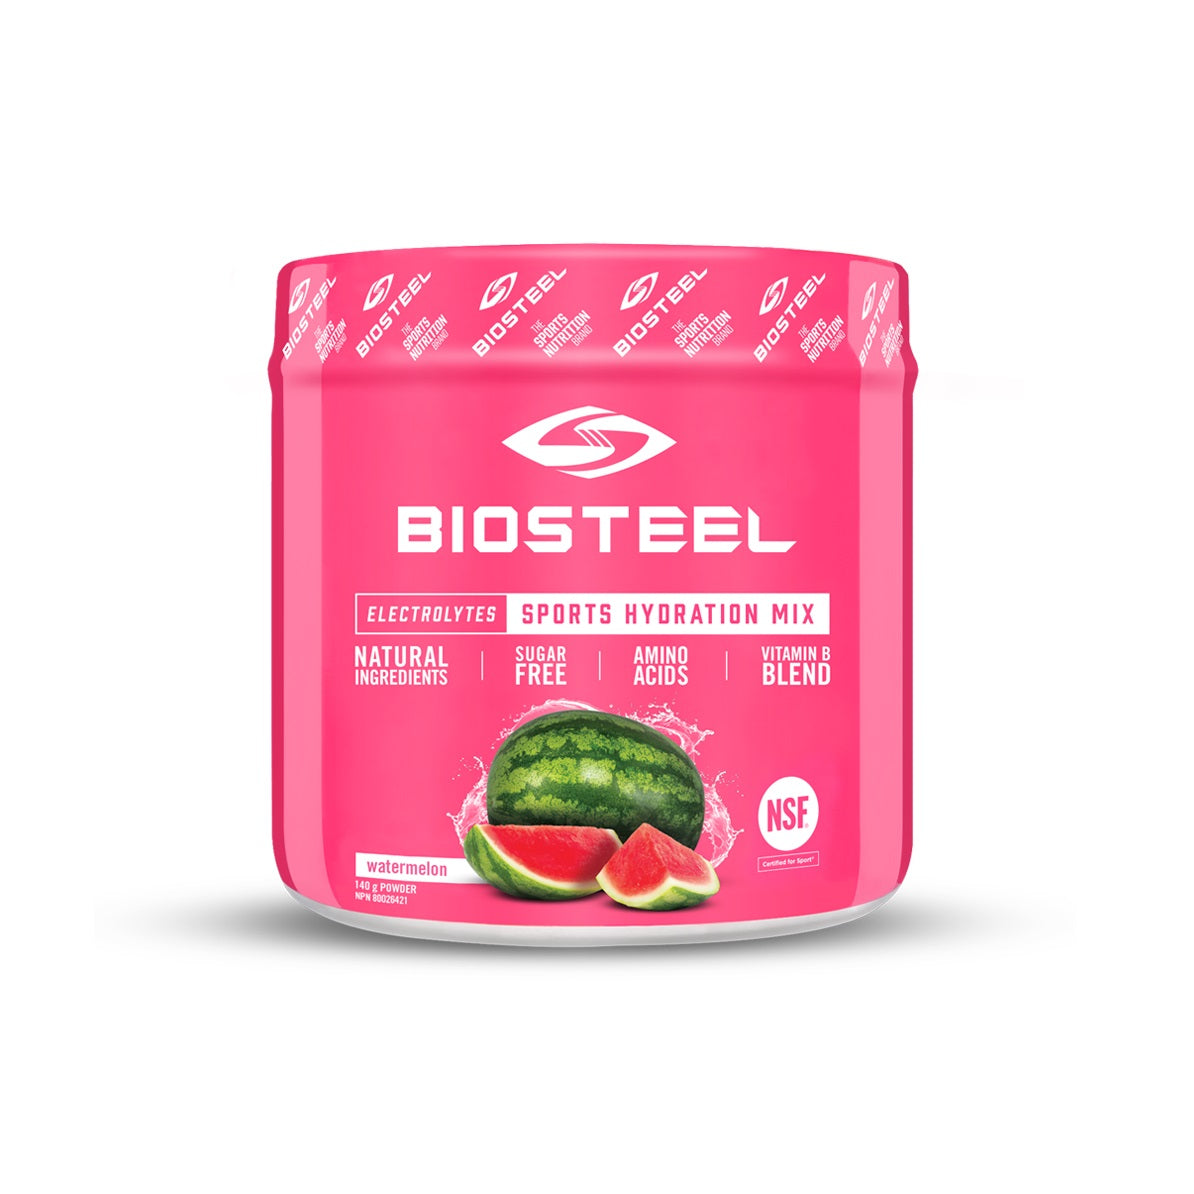 where-to-buy-new-watermelon-biosteel-flavor-vancouver